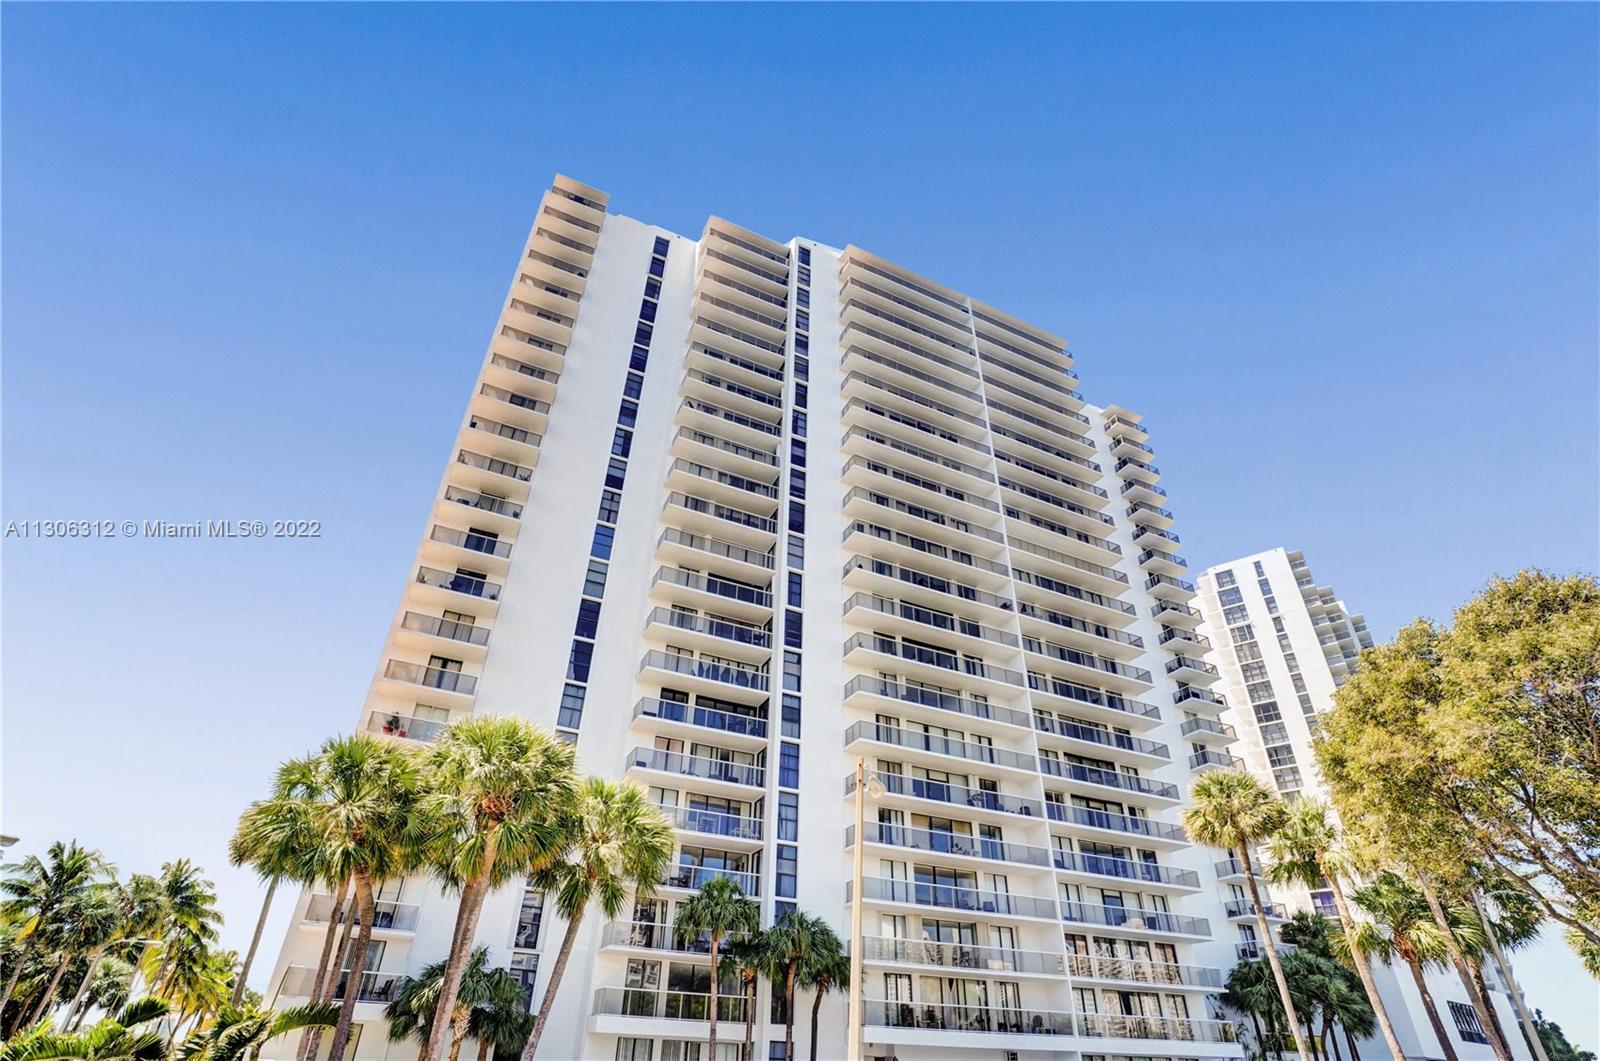 Located in a quiet and friendly building in the heart of Aventura, across from the golf course. Spli